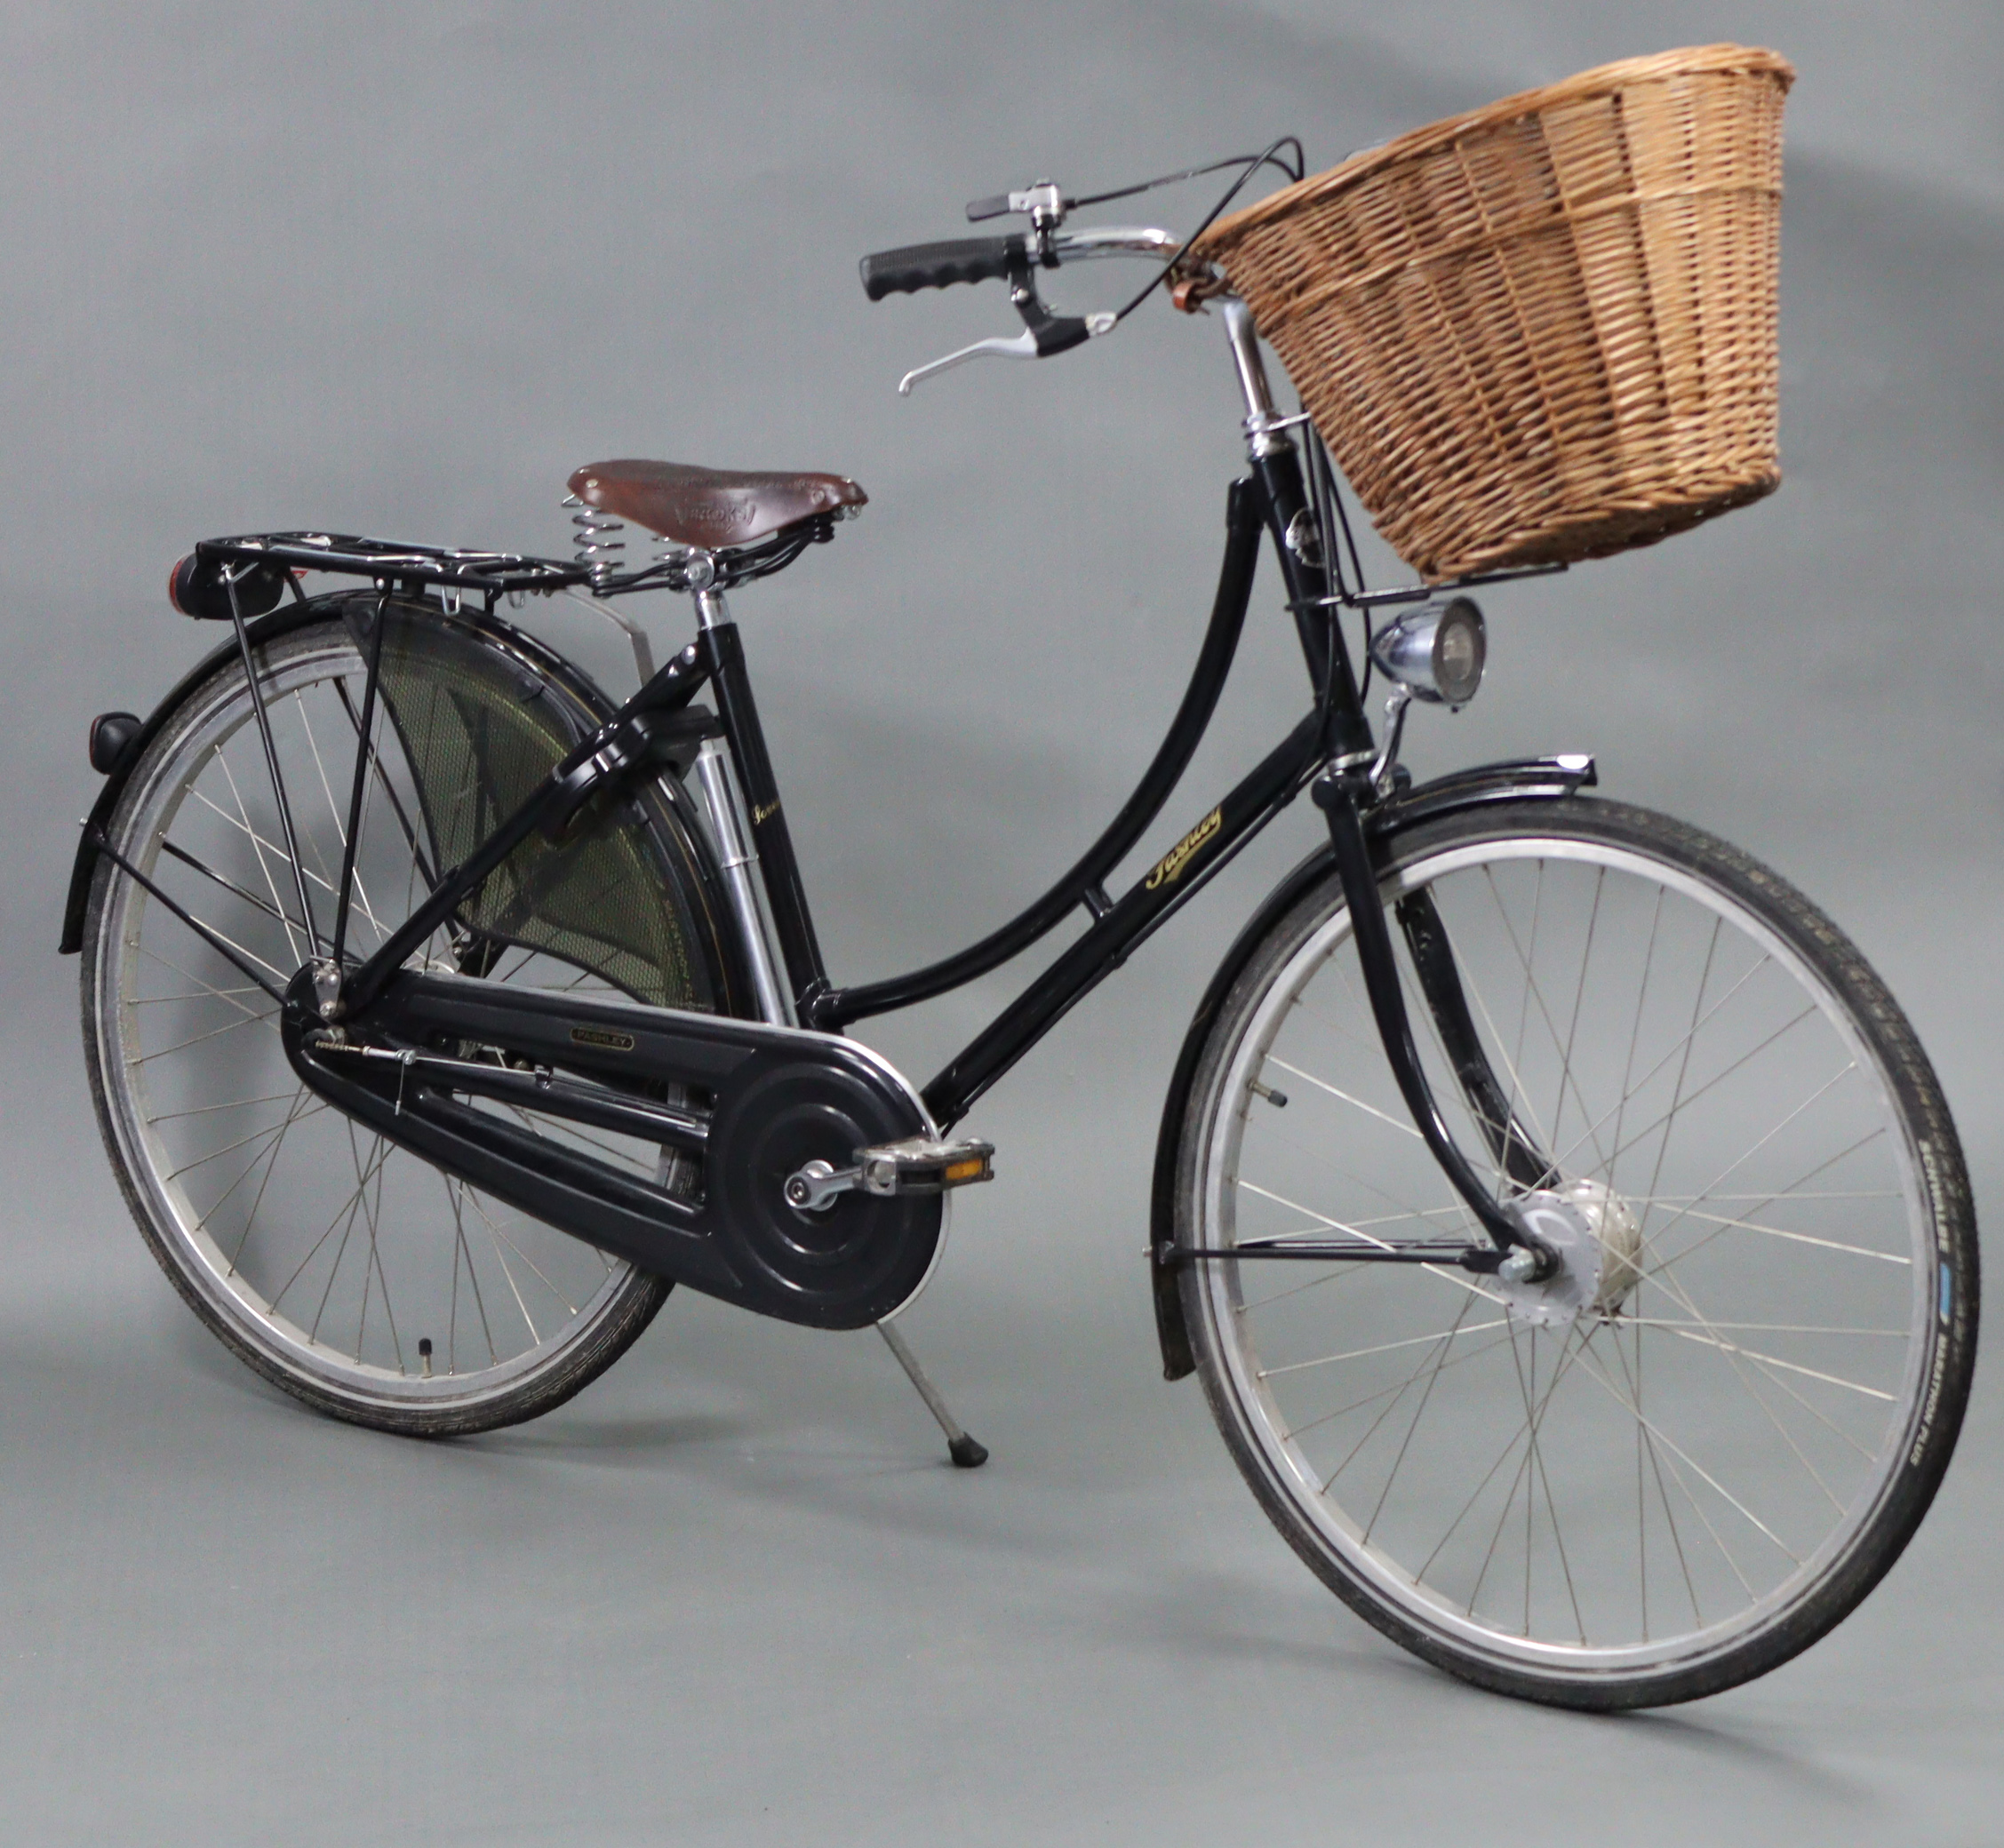 A PASHLEY “SOVEREIGN” FIVE-SPEED LADIES’ BICYCLE (Model No. 14764), with a Brooks leather